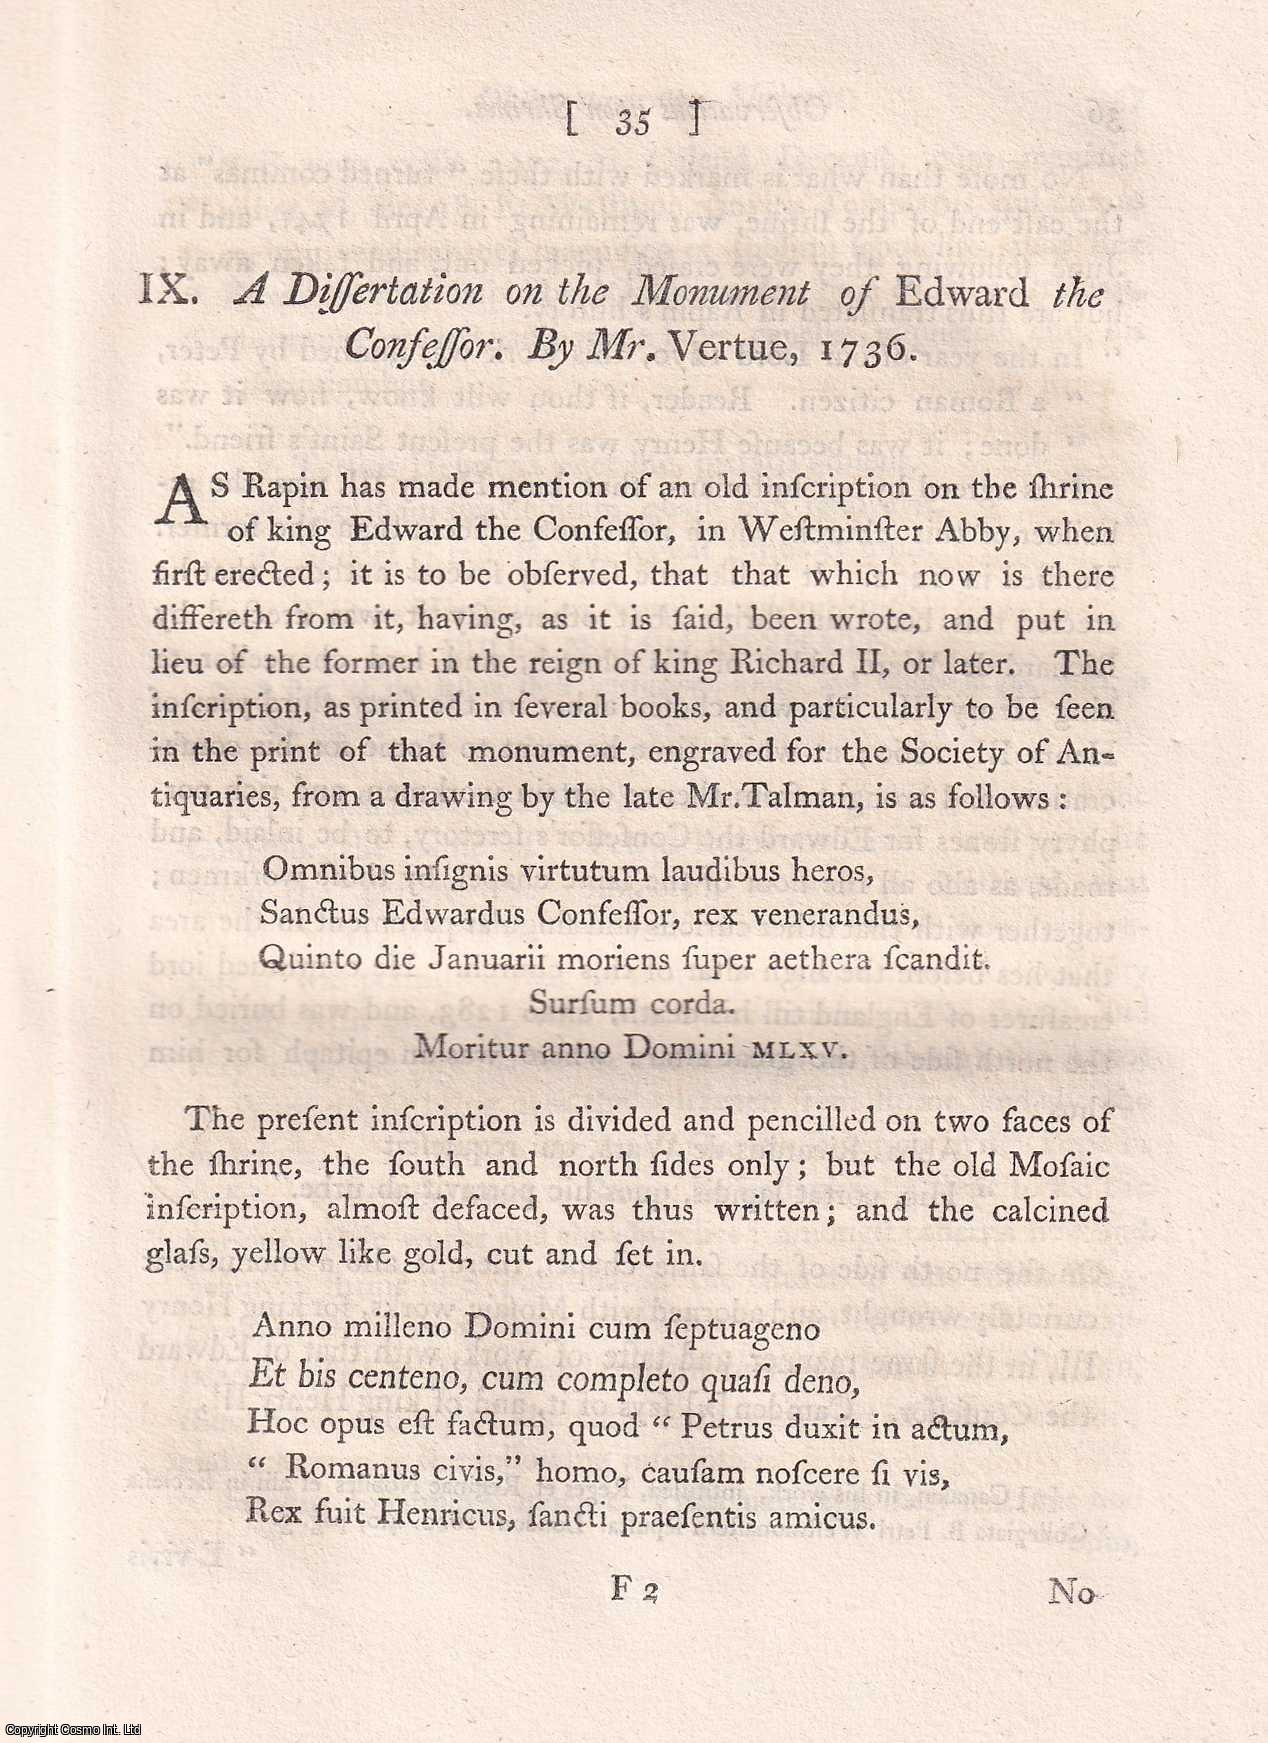 Mr. Vertue - A Dissertation on the Monument of Edward the Confessor. 1736. An uncommon original article from the journal Archaeologia, 1770.